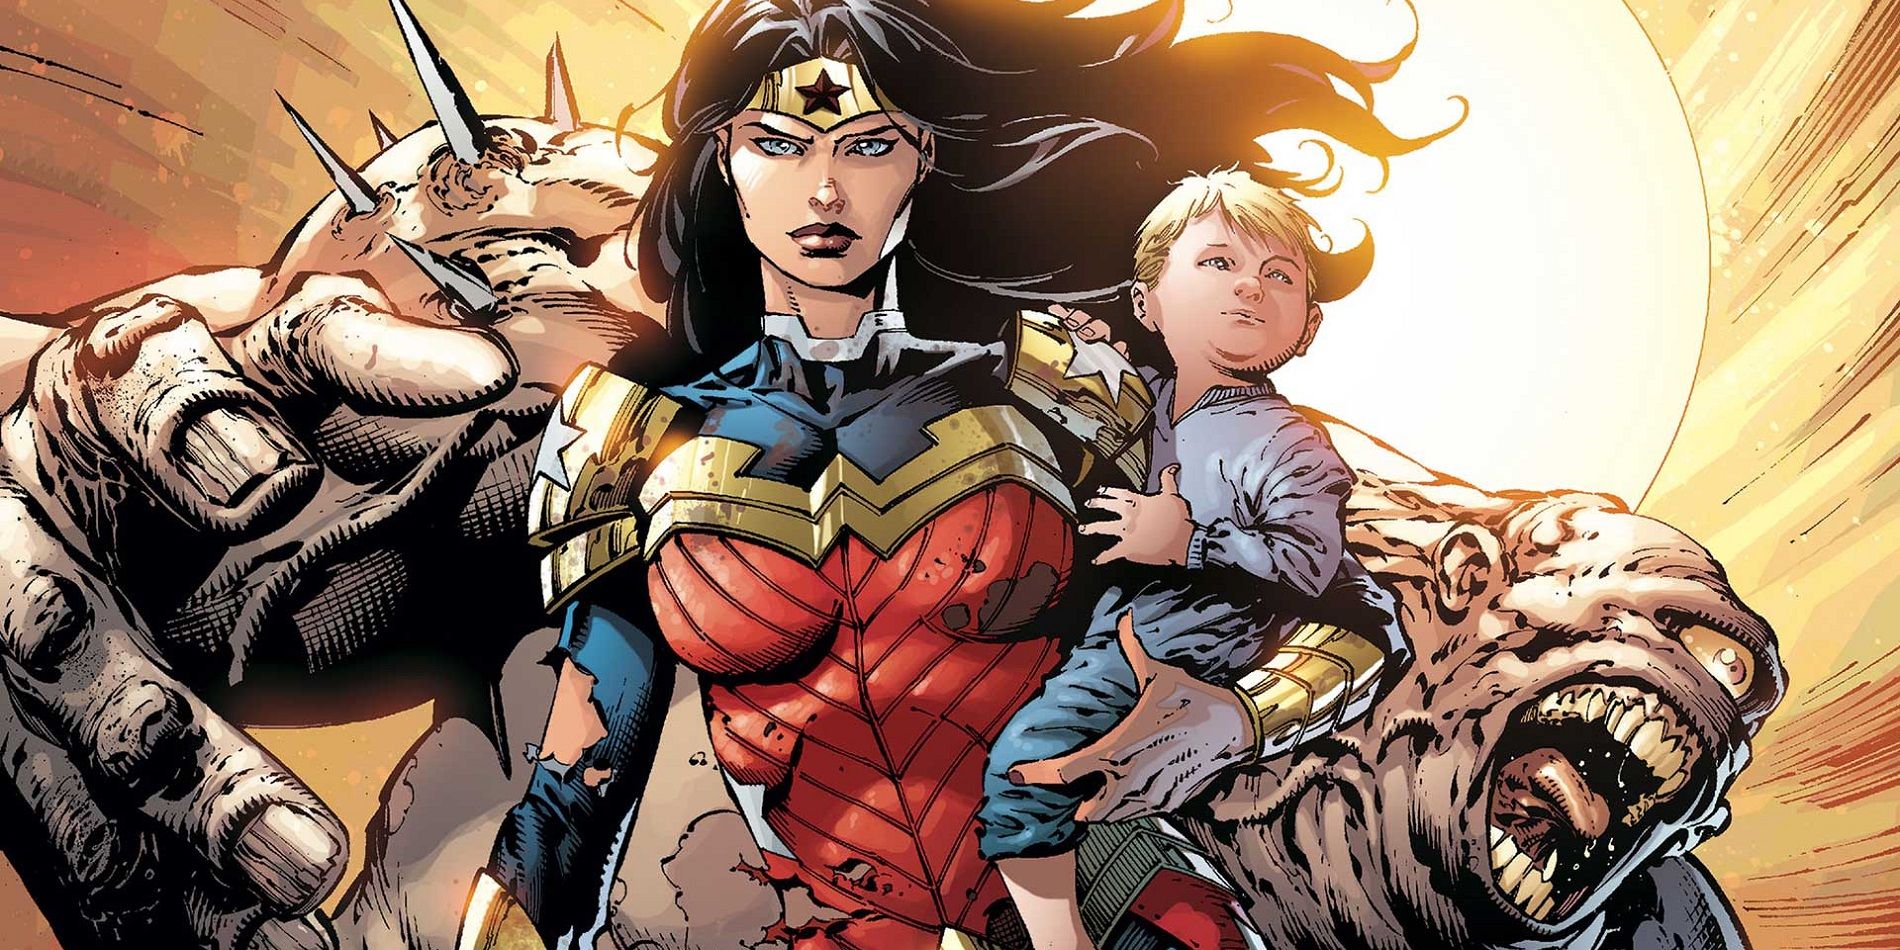 Wonder Woman's full body suit in issue number 48